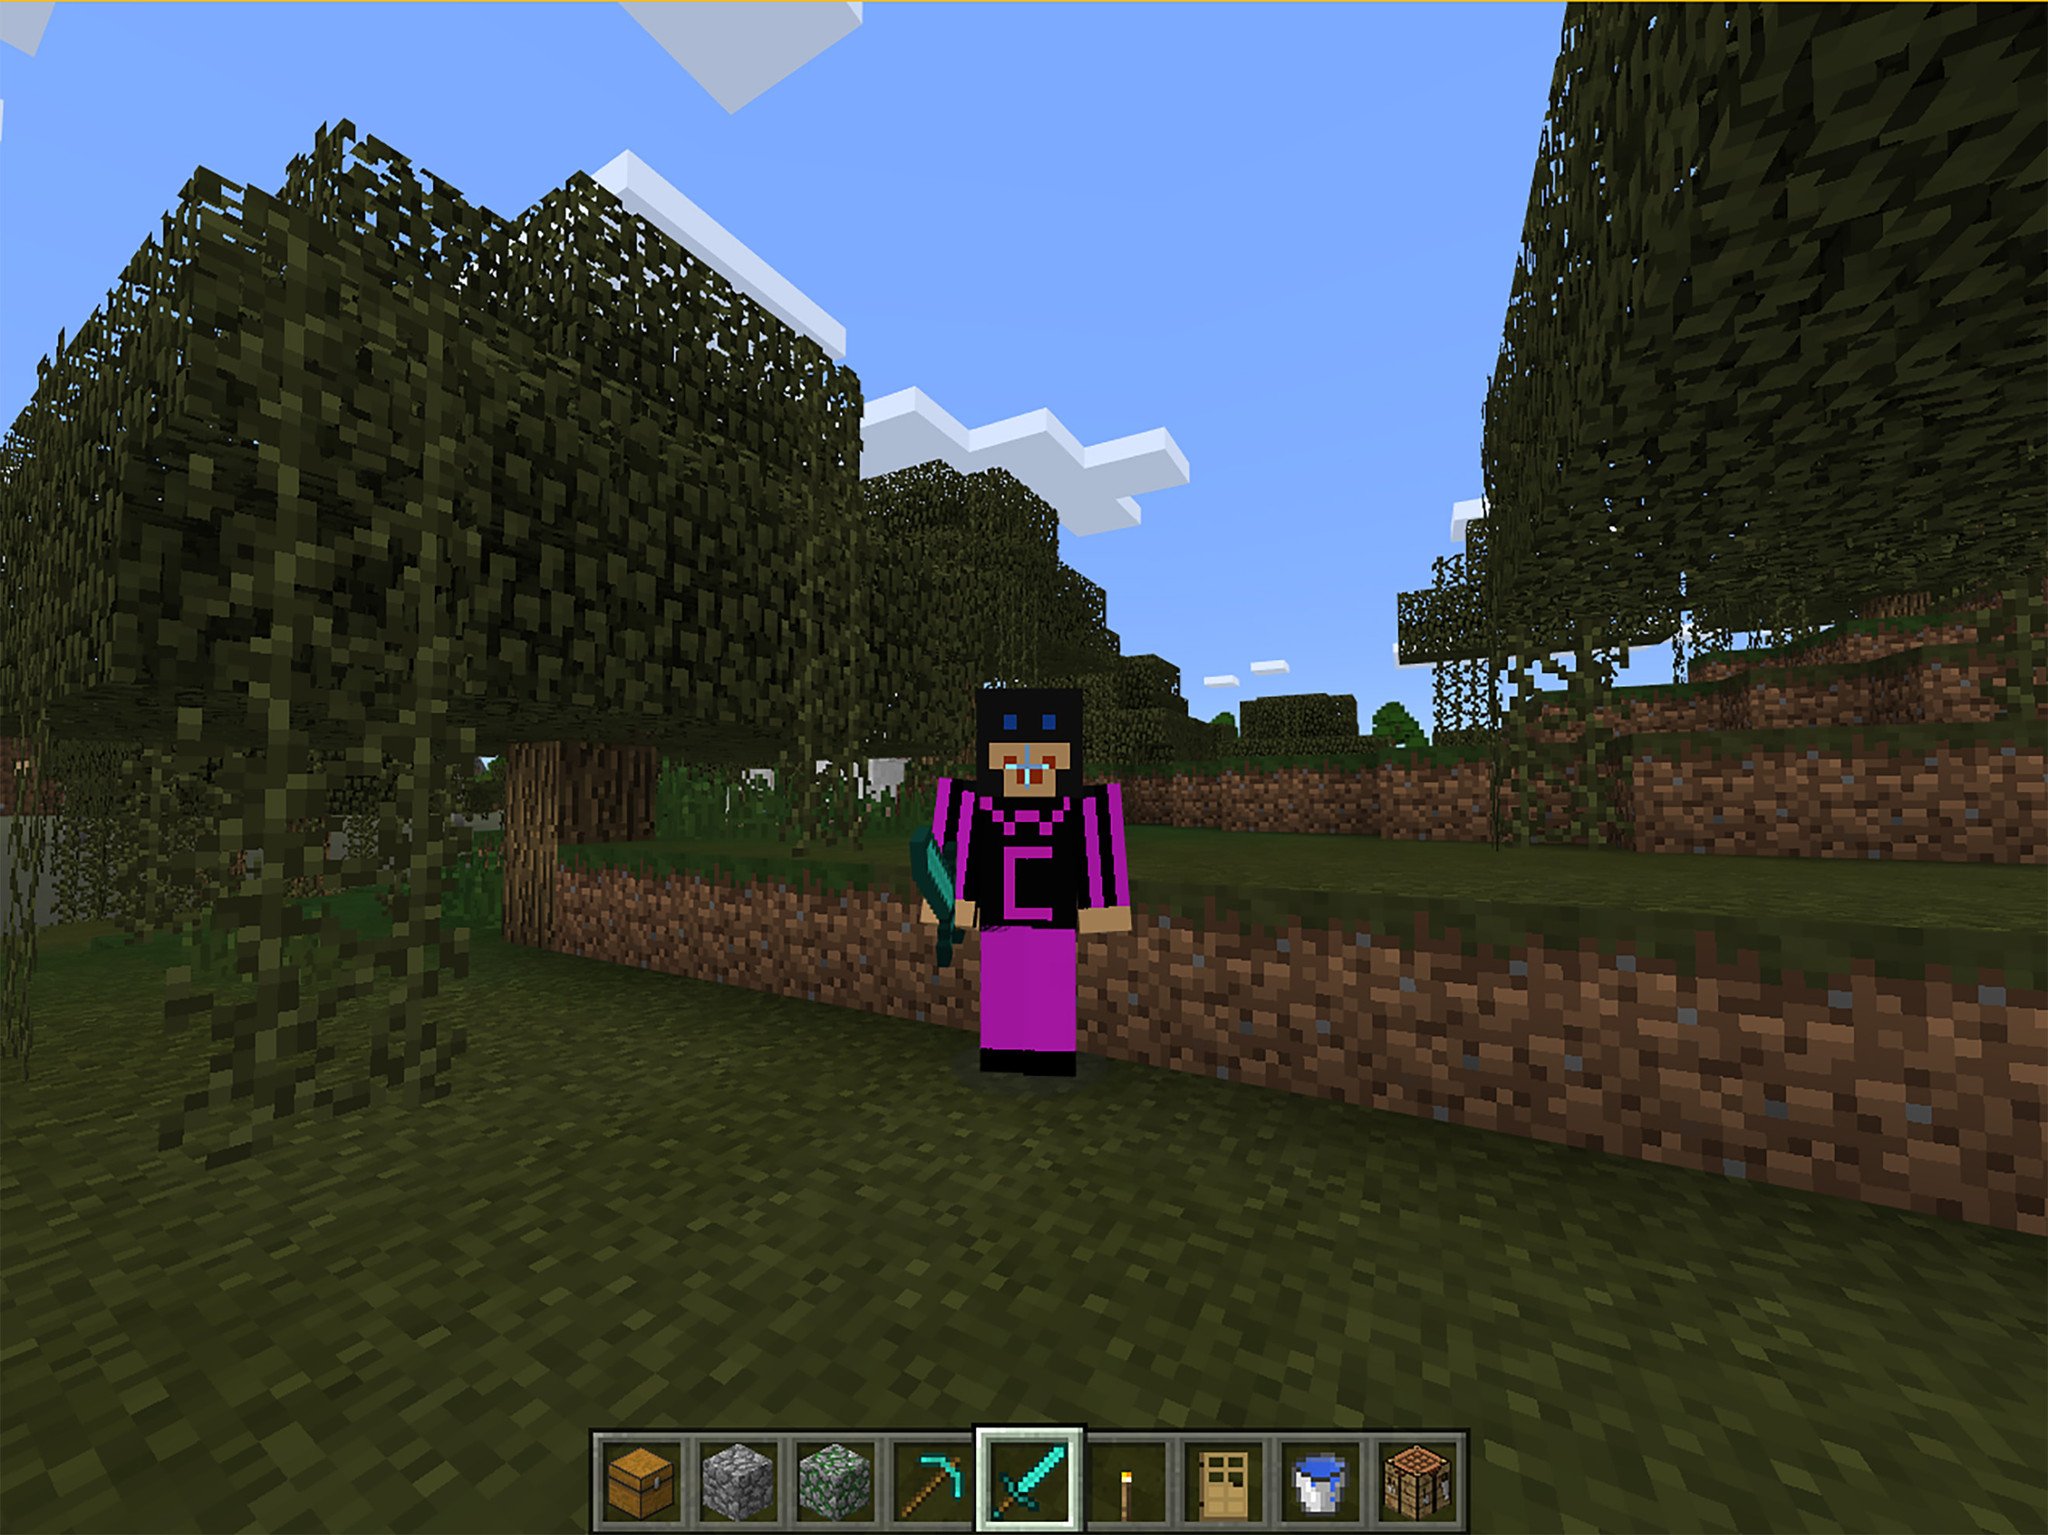 How can one install custom skins in Minecraft? - Quora